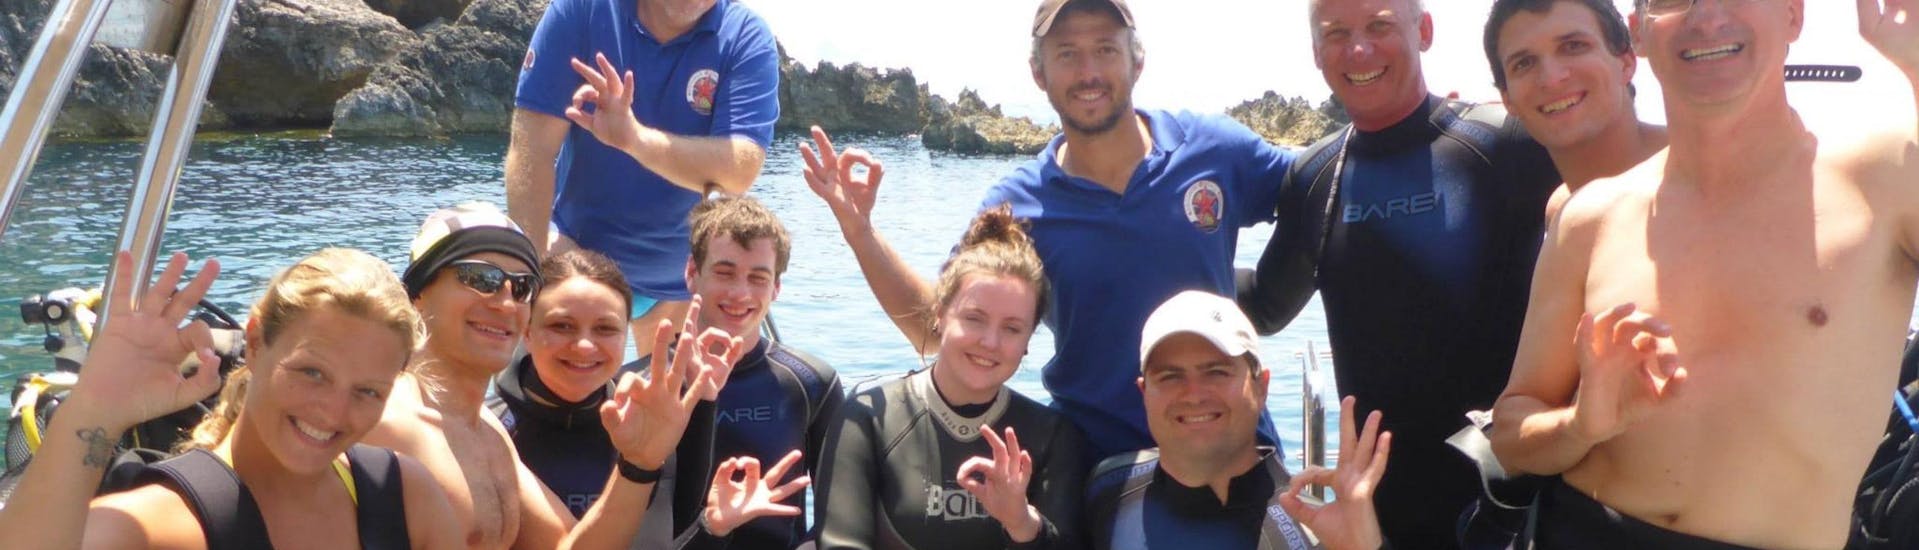 A group of divers is signalling 'ok' during a group photo taken on the boat from Achilleon Diving Center Corfu.